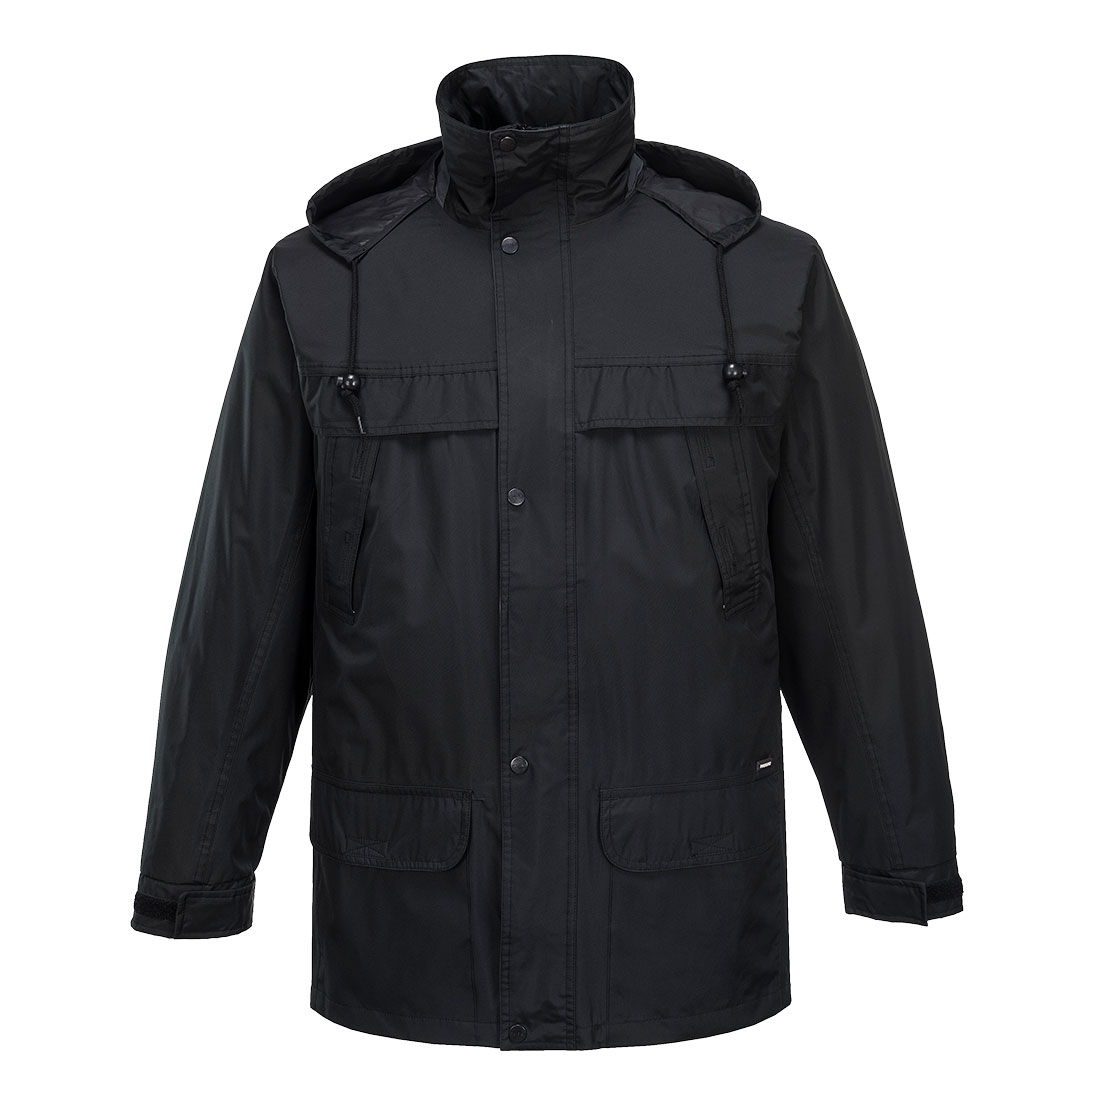 CLASSIC JACKET BLACK 2XL -COTTON FLANETTE LINING, WATER PRF